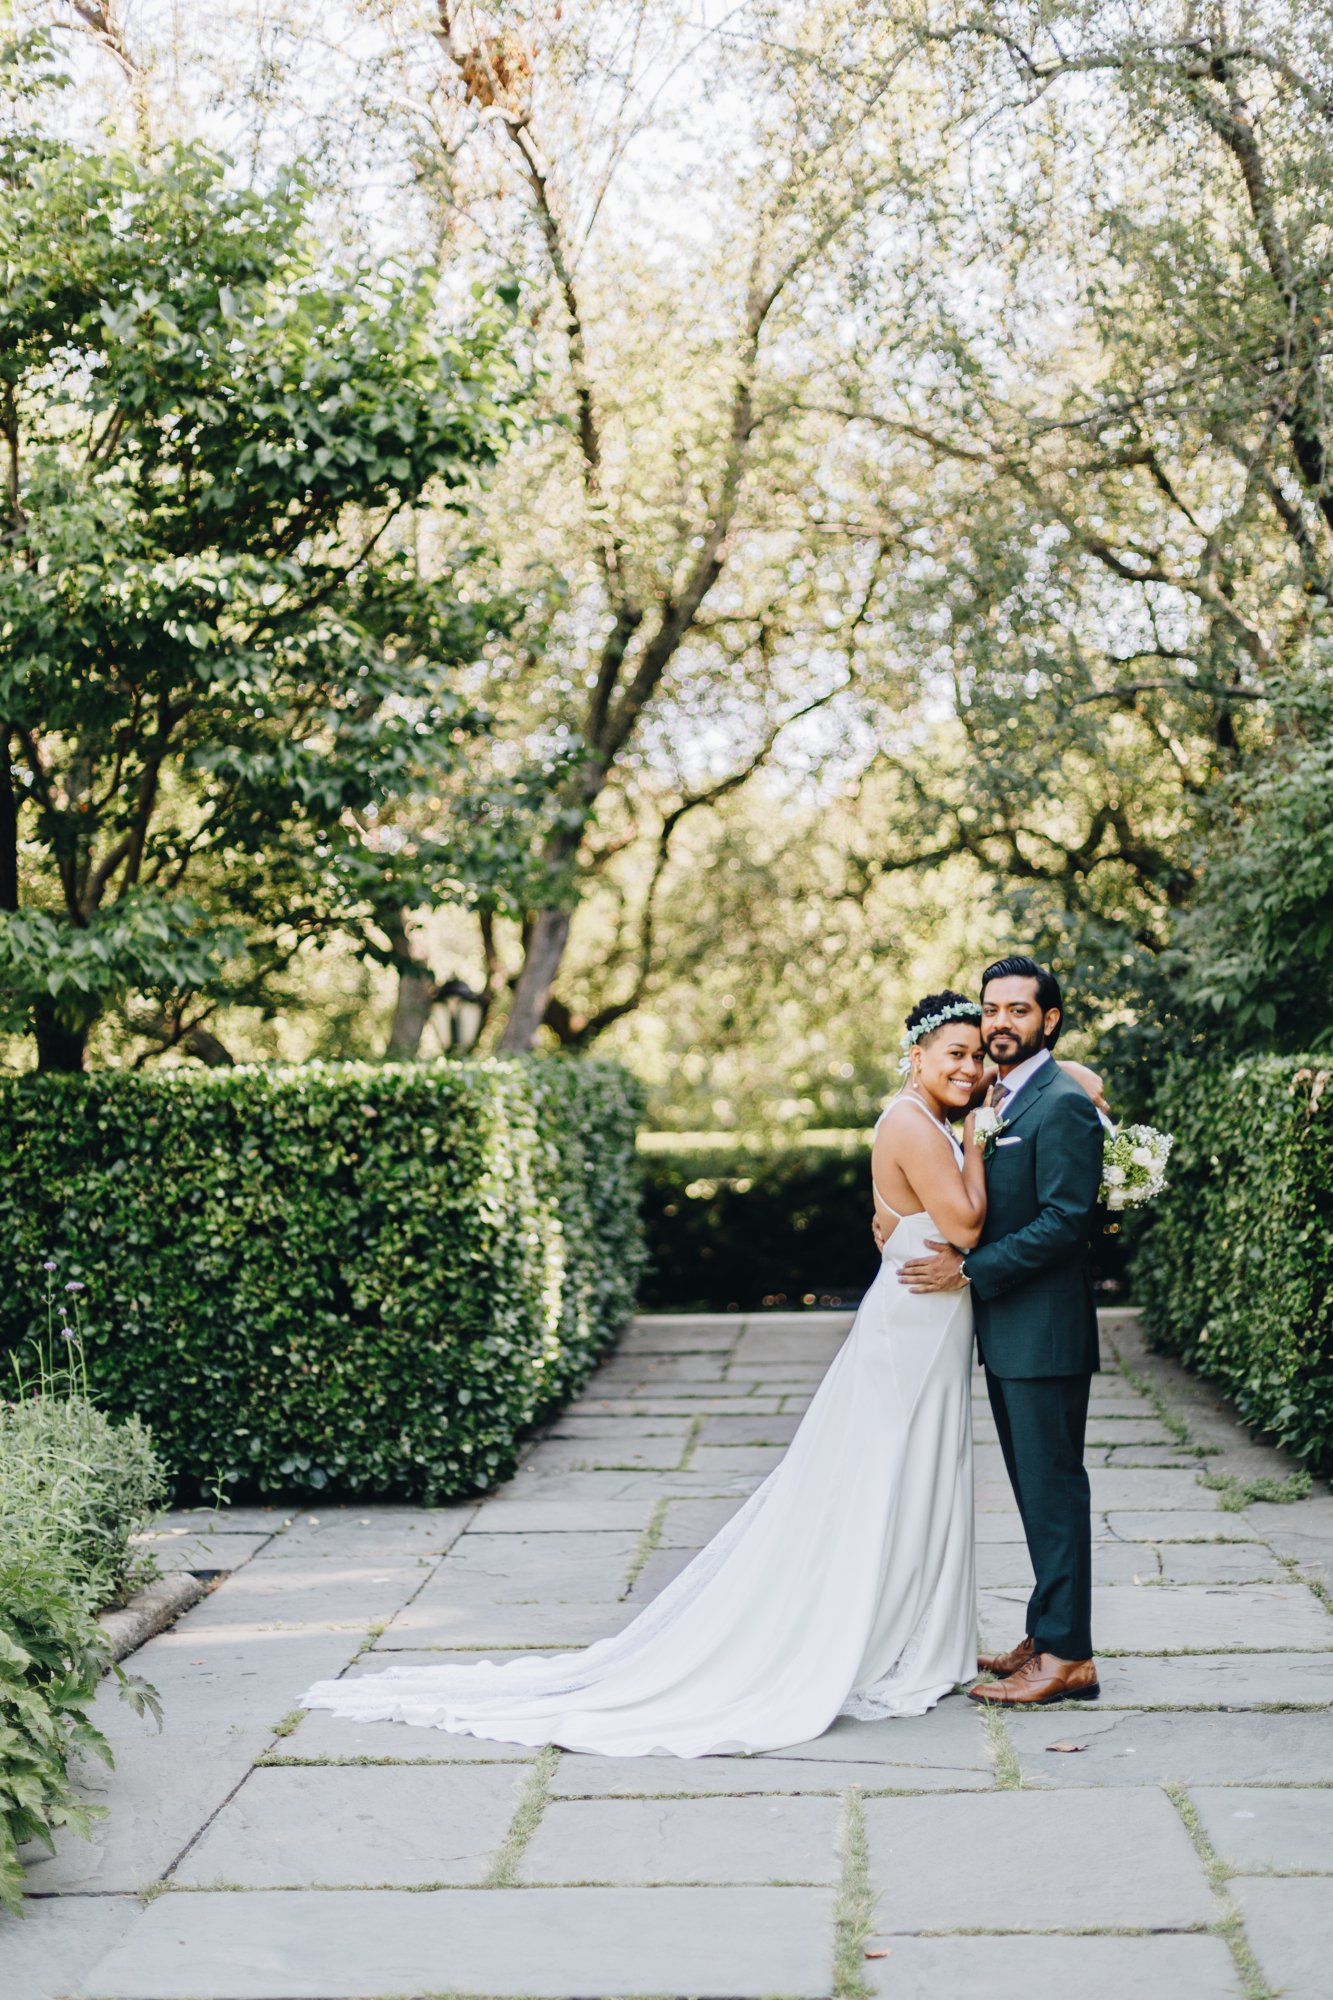 Central Park micro wedding at the Conservatory Garden